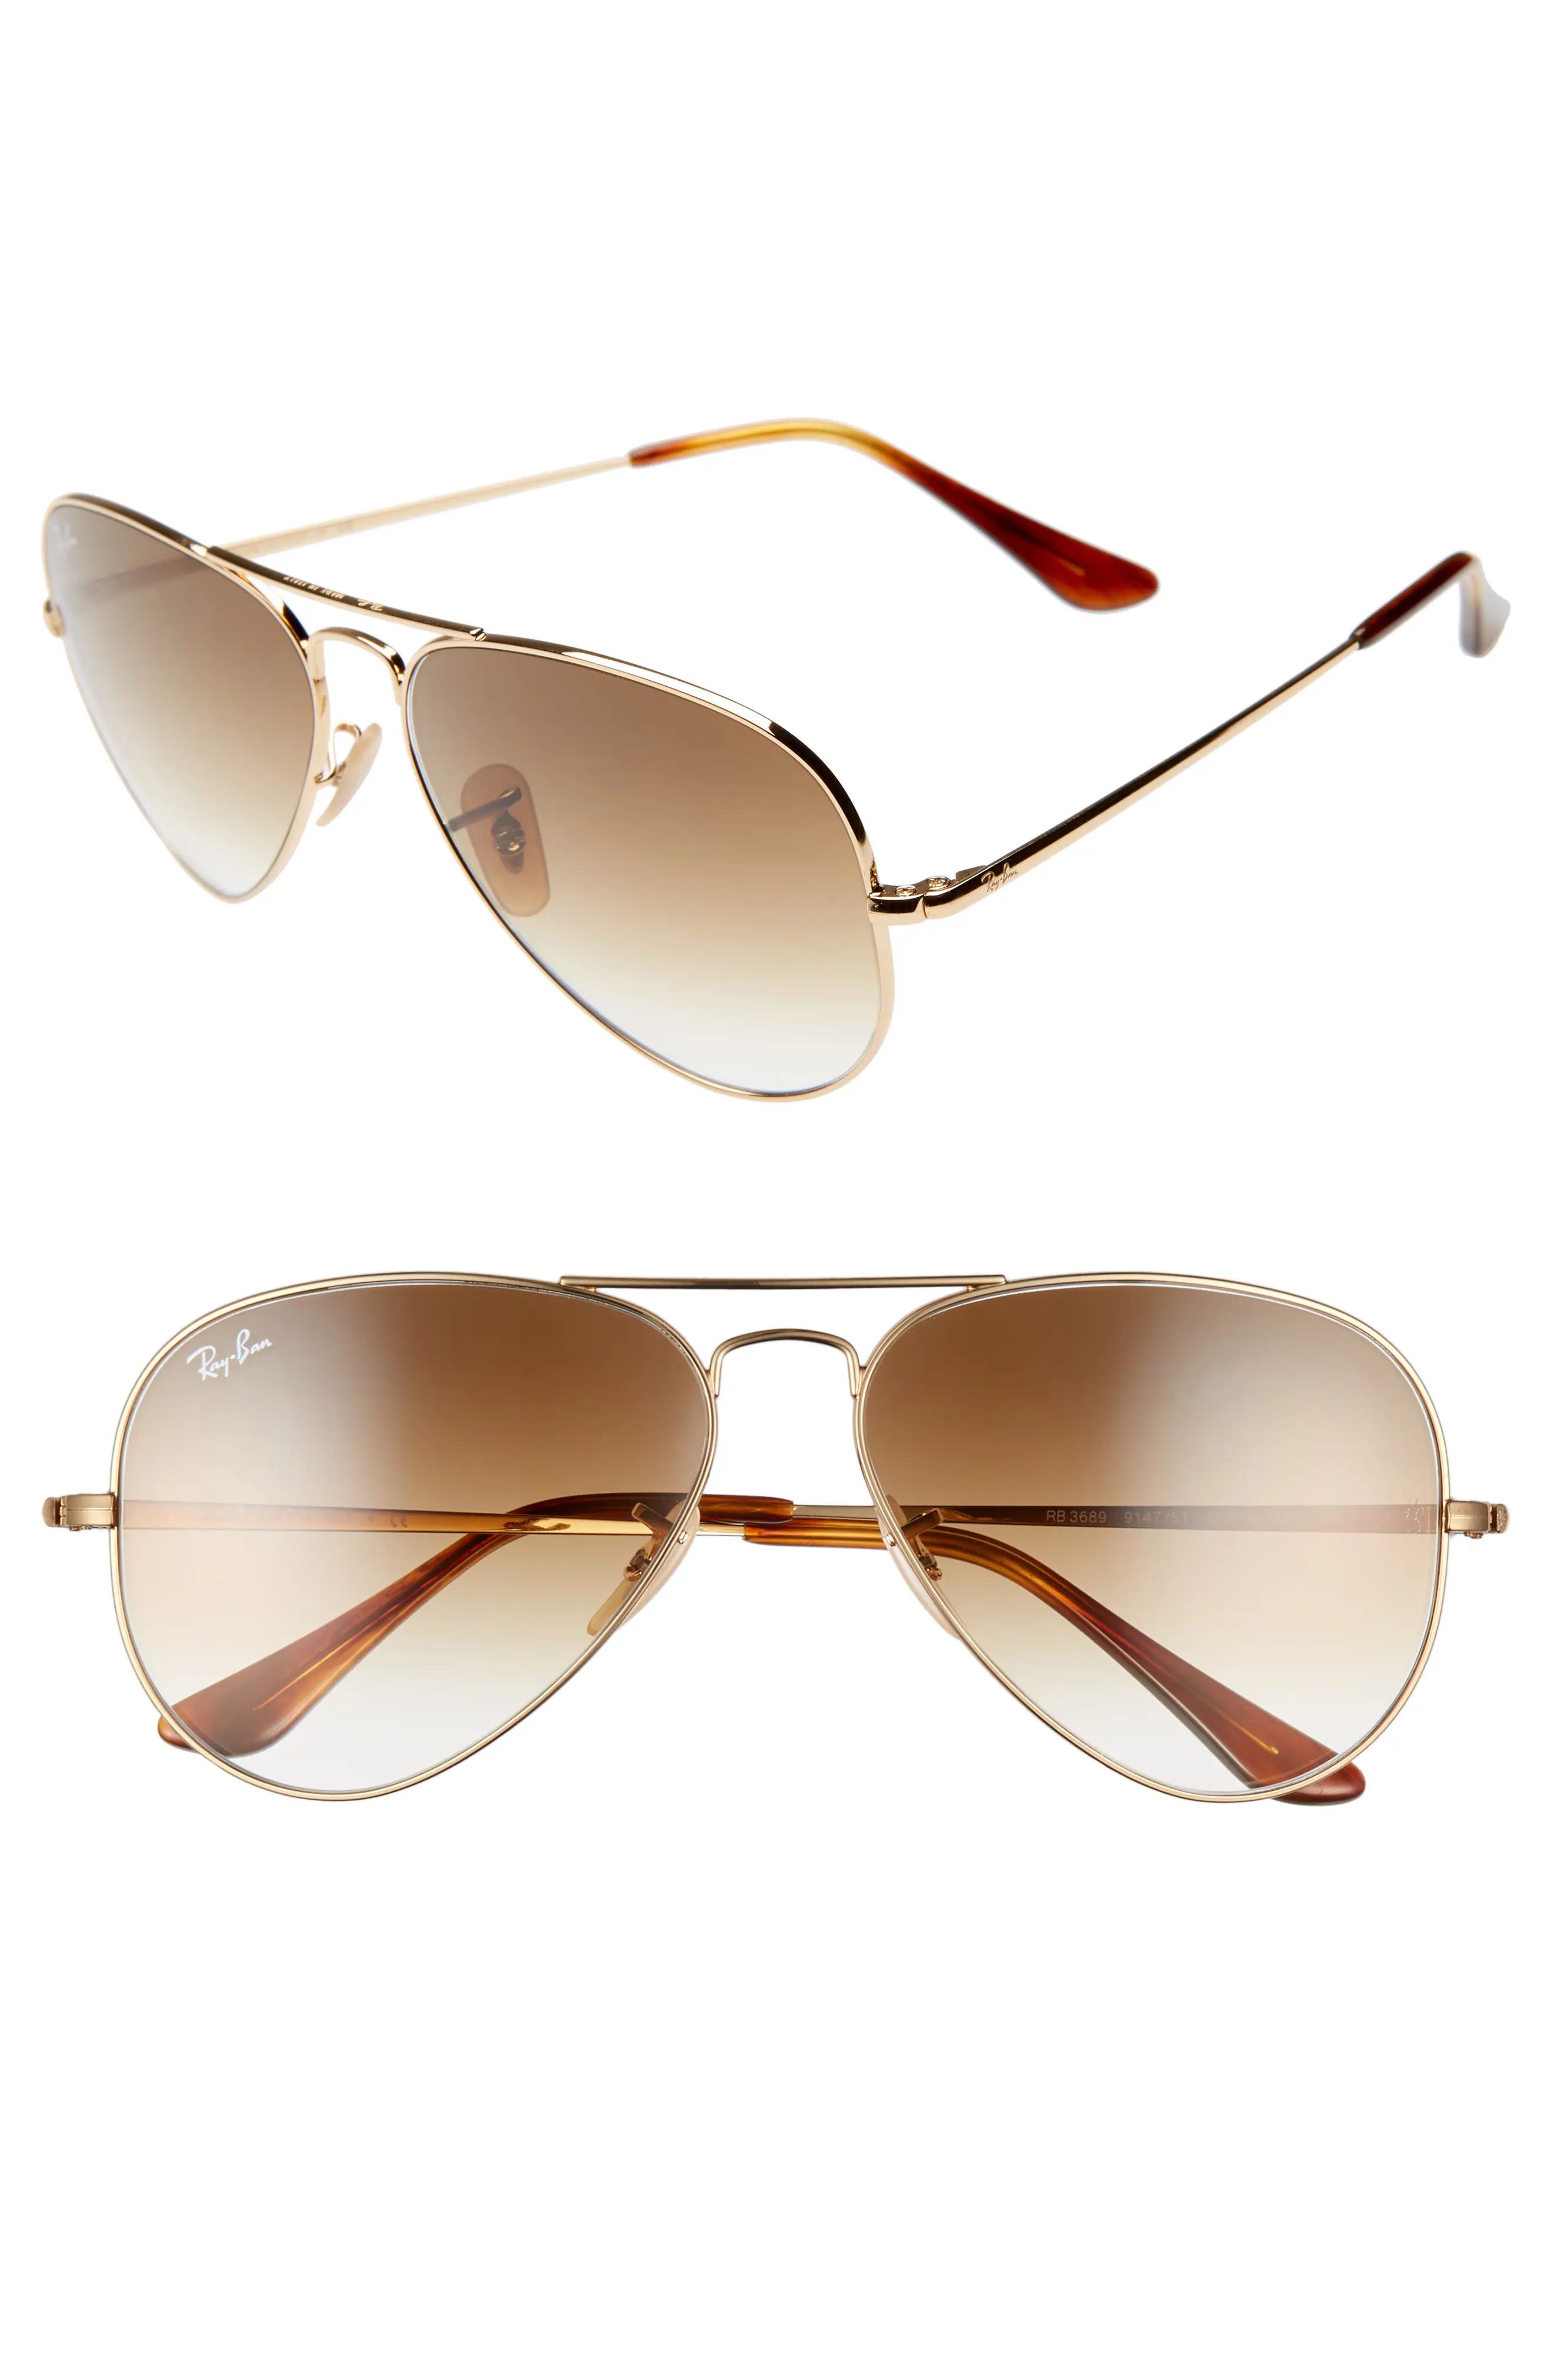 Ray-Ban 58mm Aviator Sunglasses - Gold/ Brown Gradient | Nordstrom